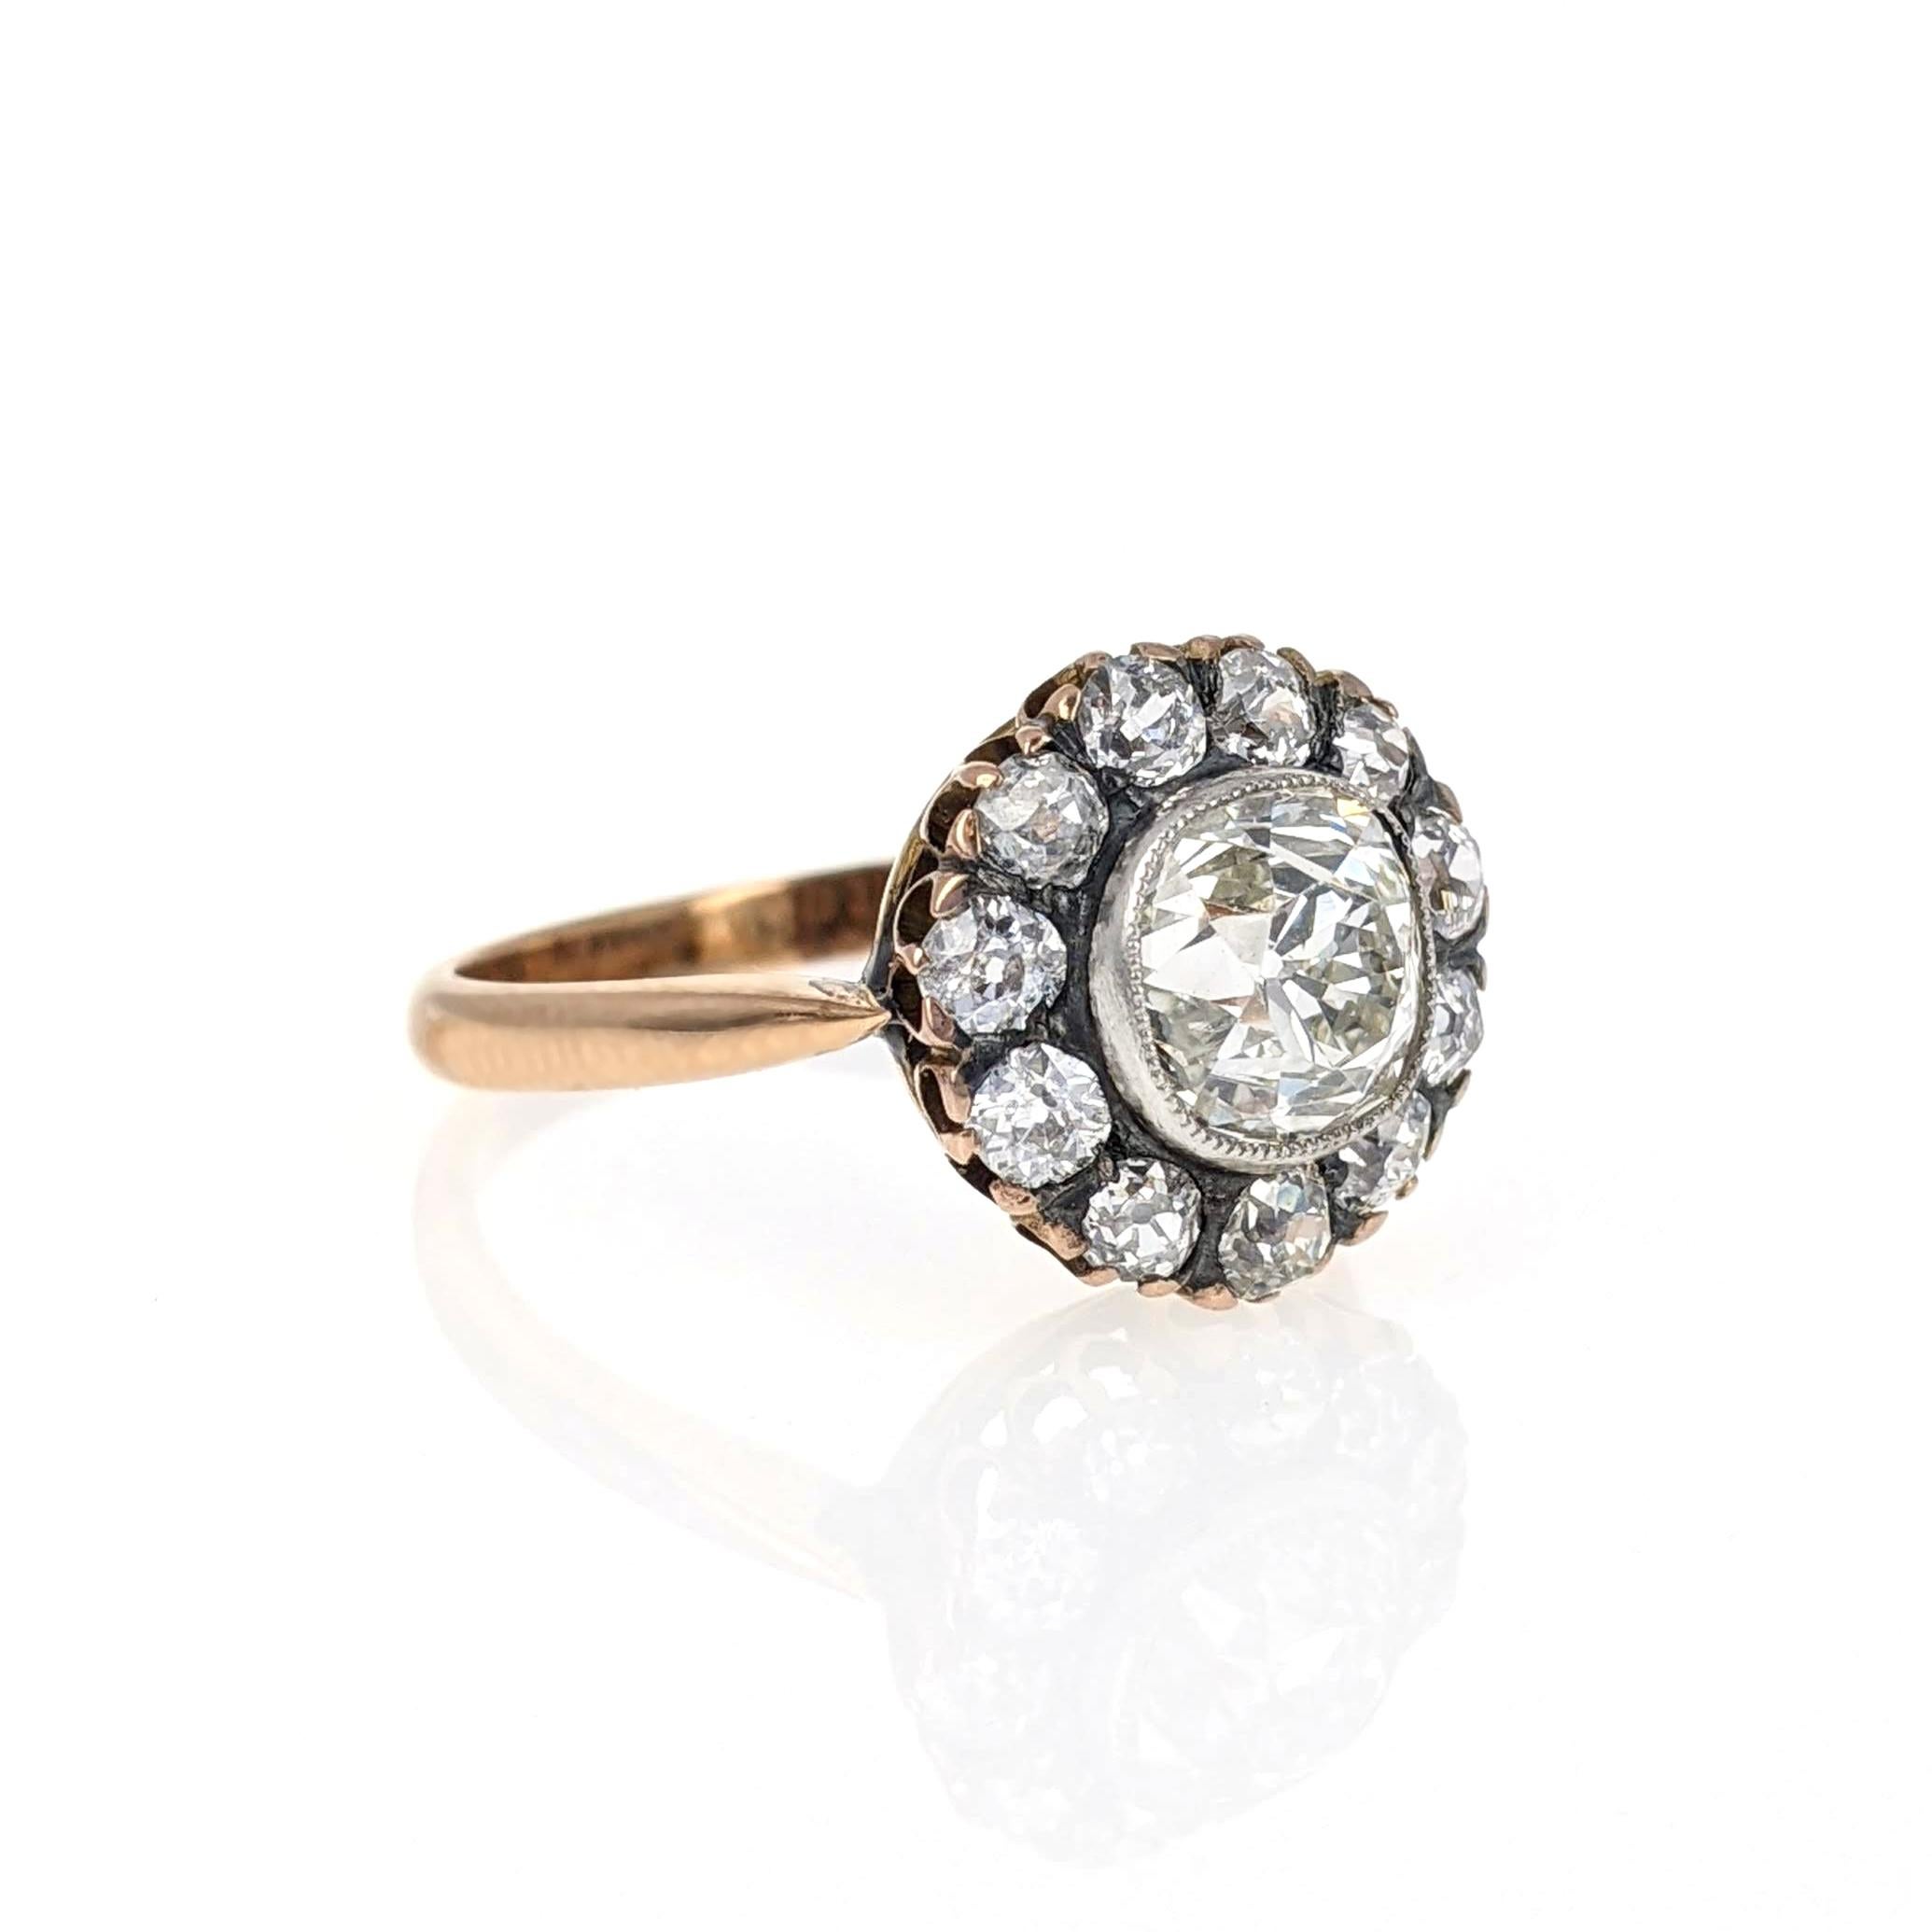 This charming antique cluster ring centers upon an old mine-cut diamond weighing 1.83 carats and is further surrounded by eleven old-cut diamonds. It is expertly crafted in 18 karat rose gold and topped with silver. Size 7.75.